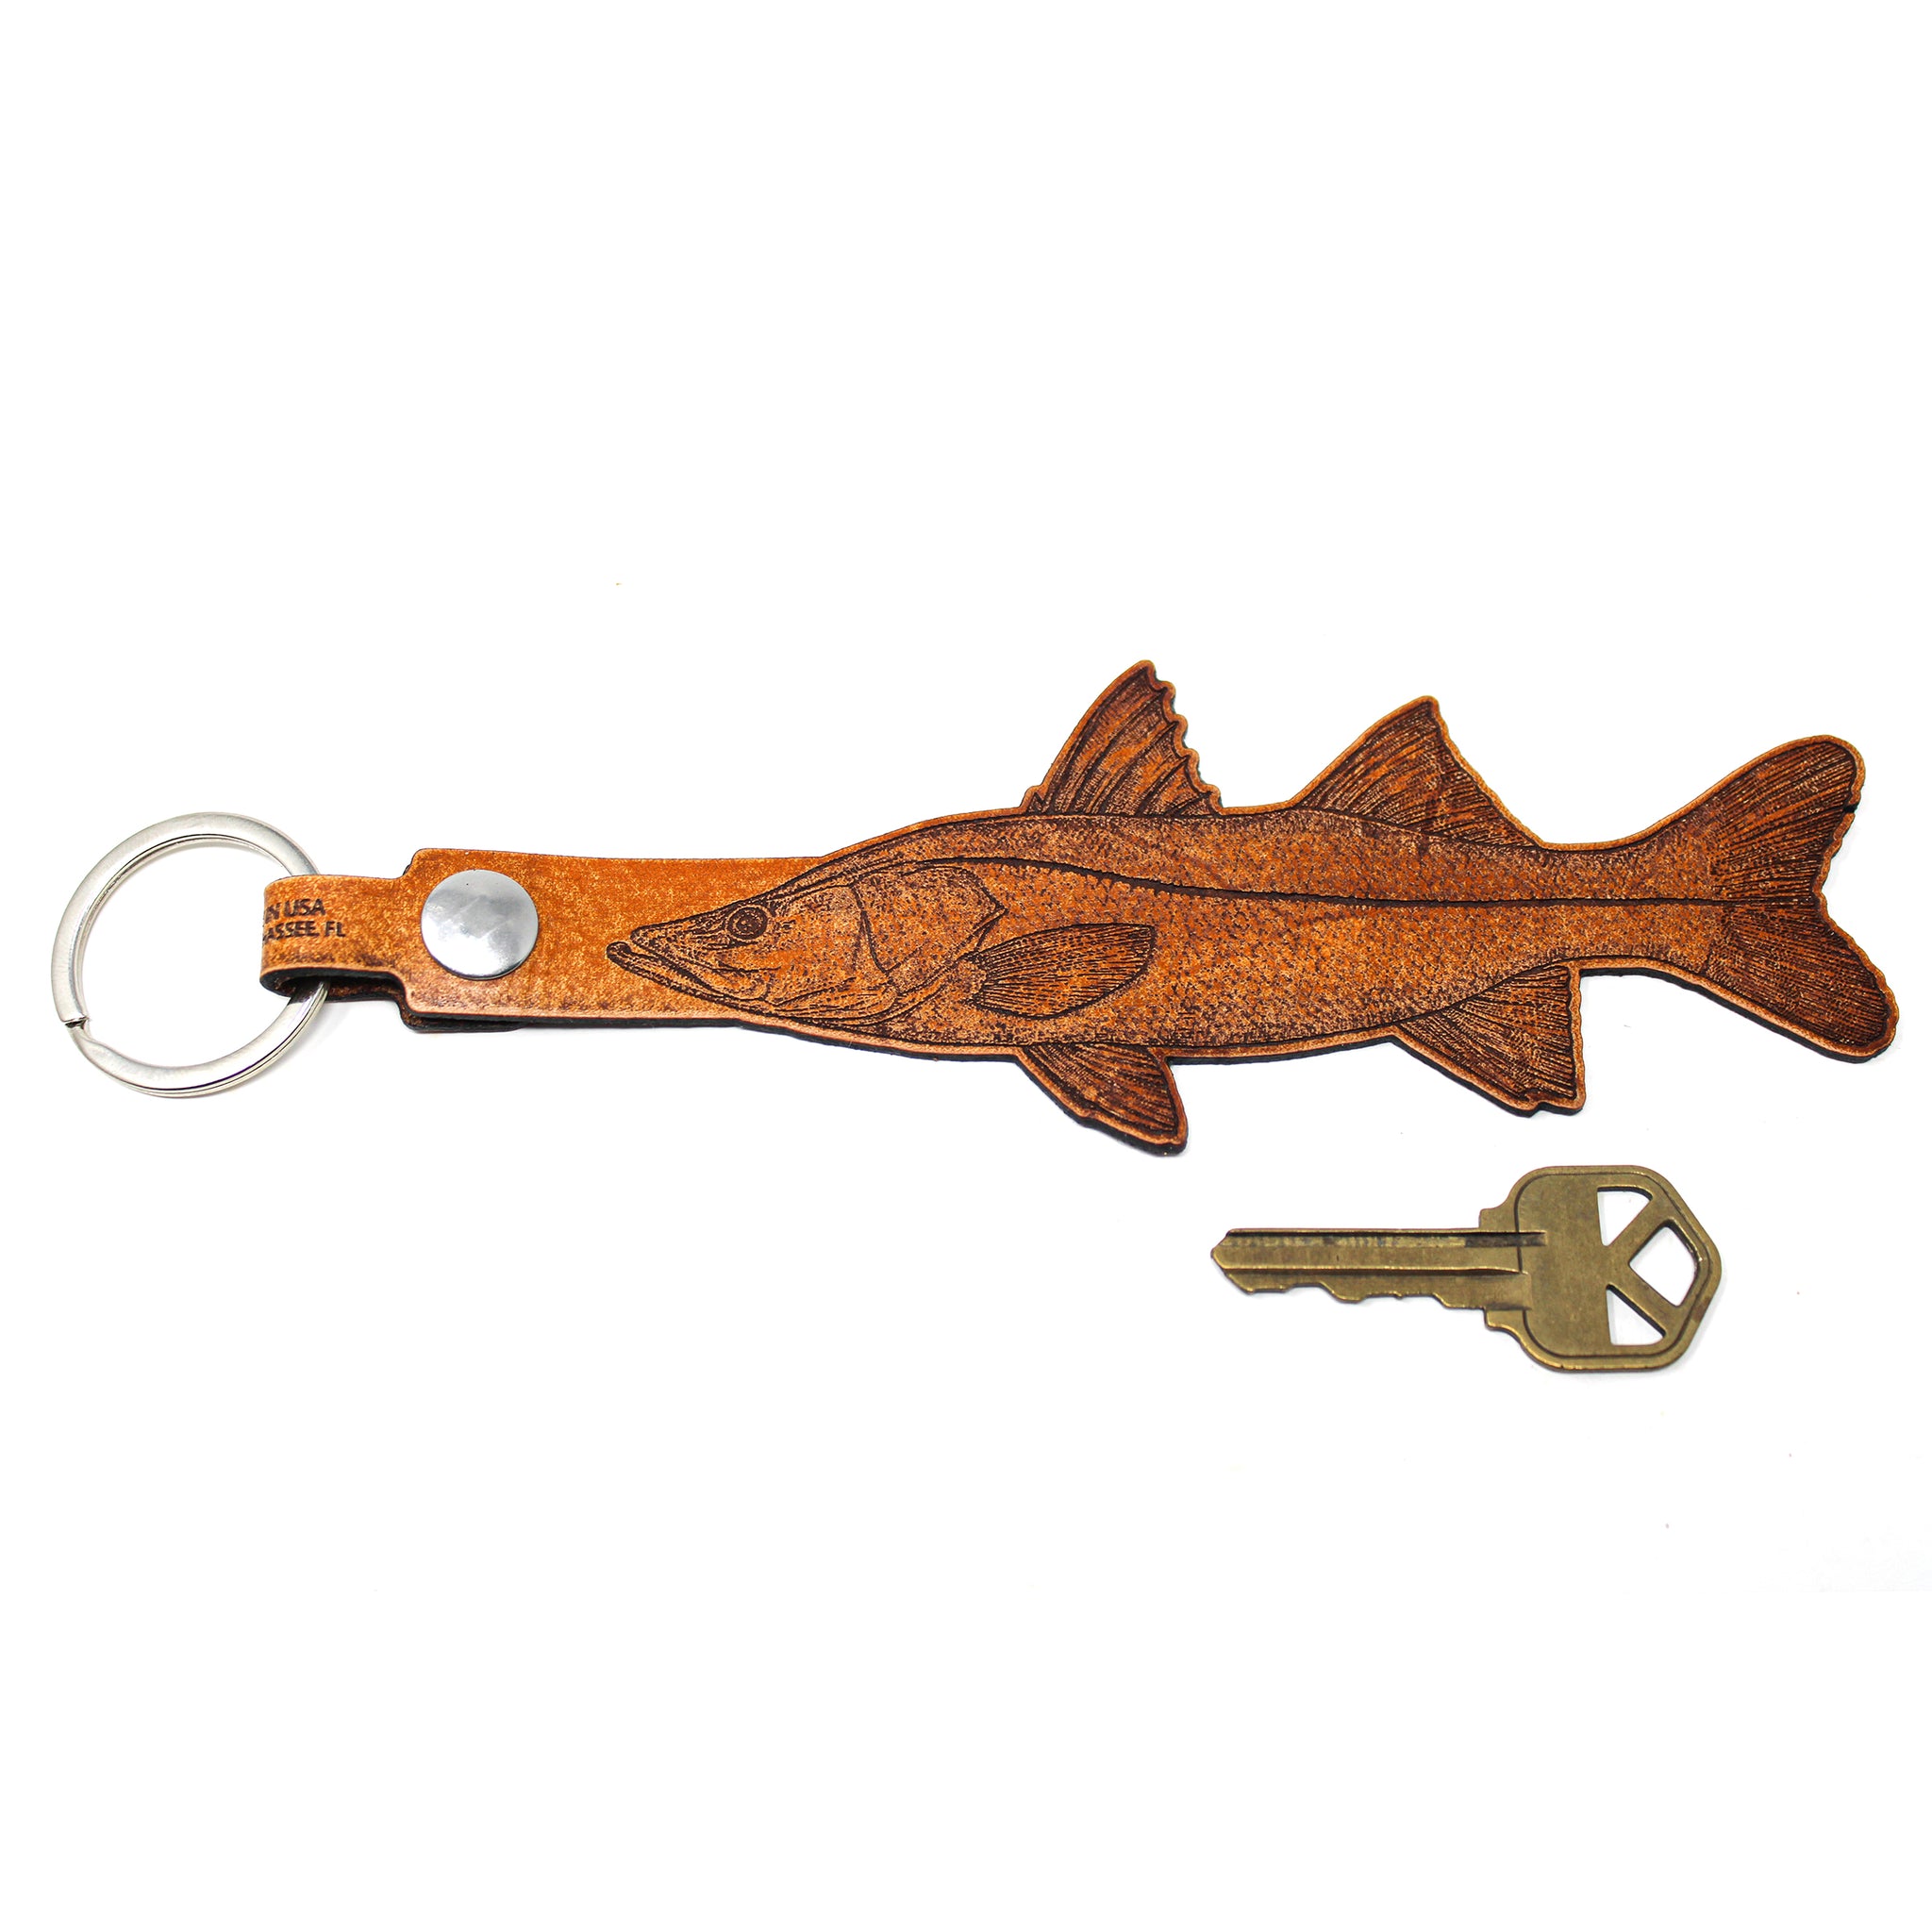 Leather Keychain - Large Snook Keychain